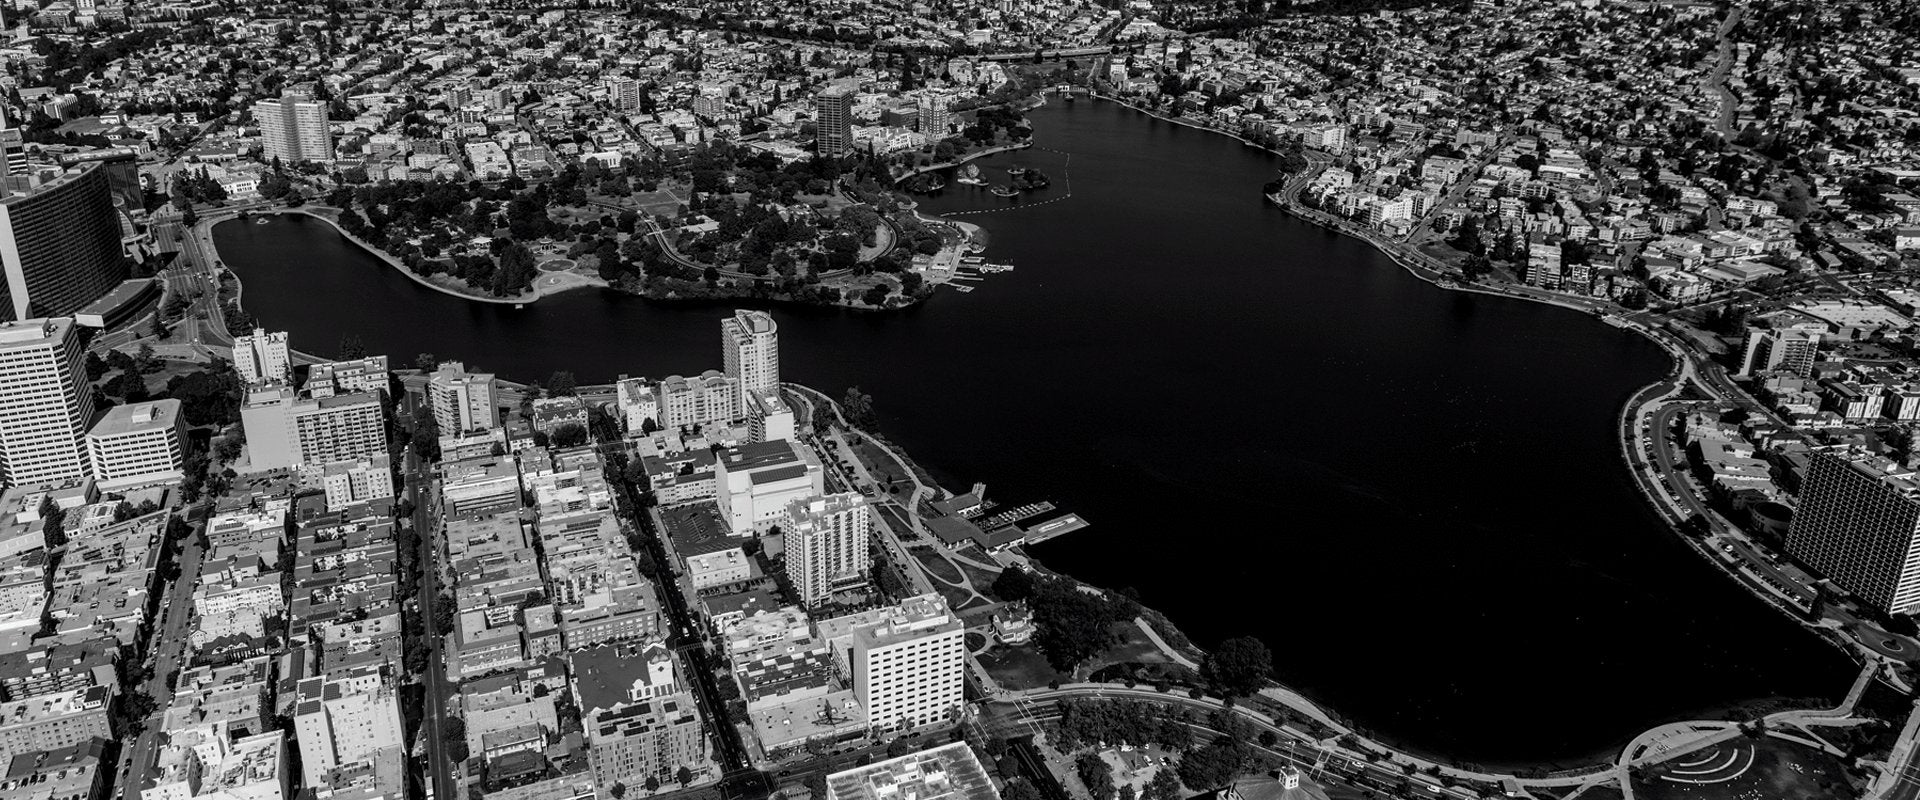 A black and white aerial view of Oakland with Lake Merritt as the focus.